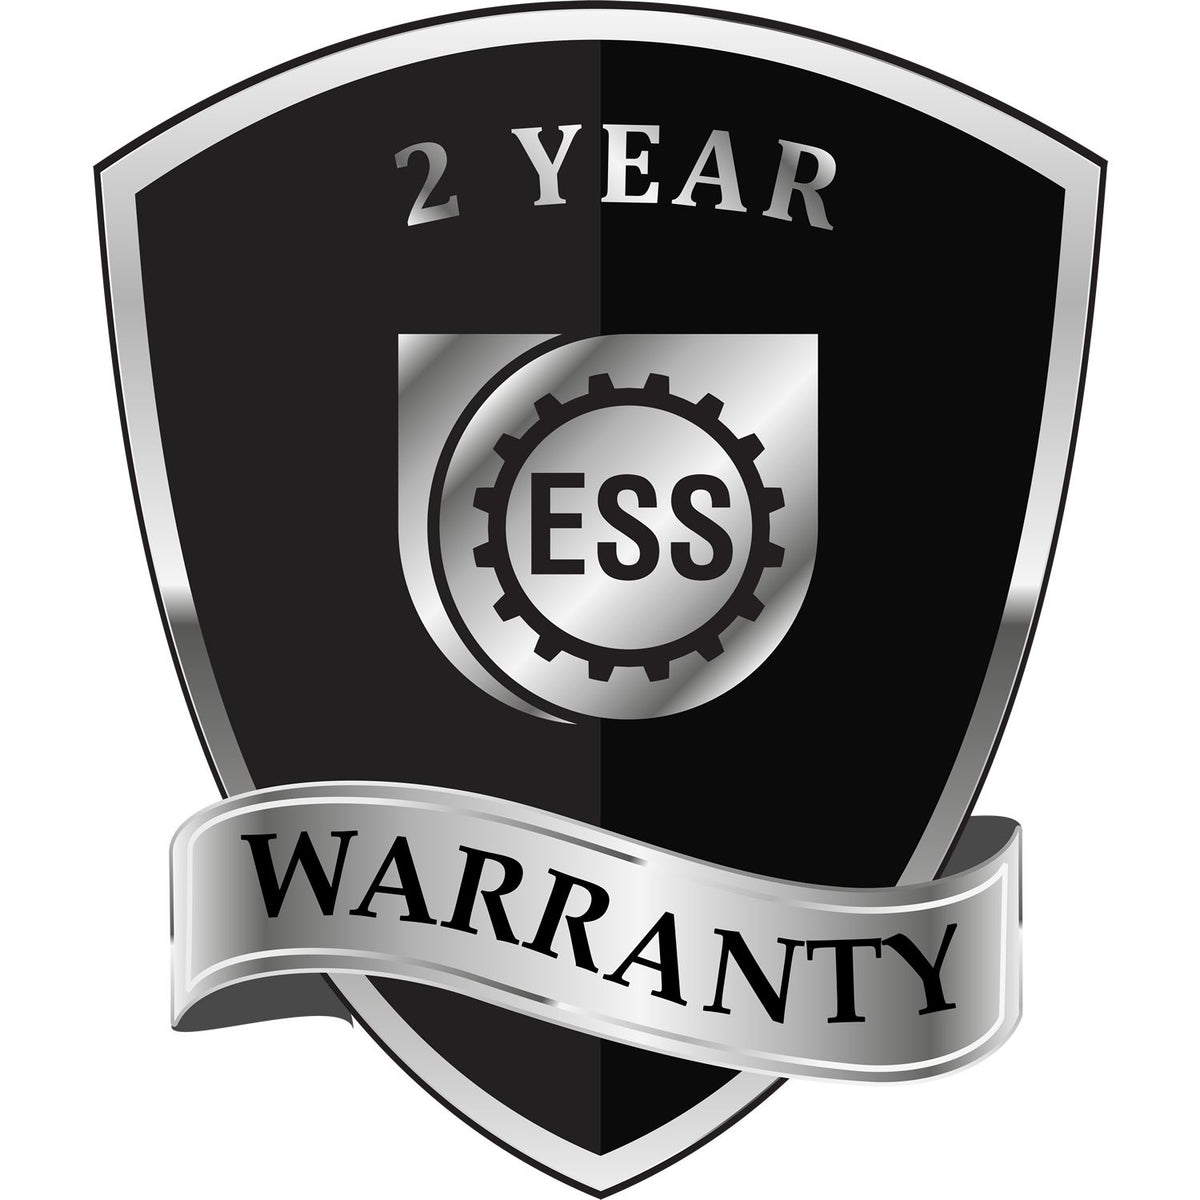 A black and silver badge or emblem showing warranty information for the State of Kentucky Extended Long Reach Geologist Seal